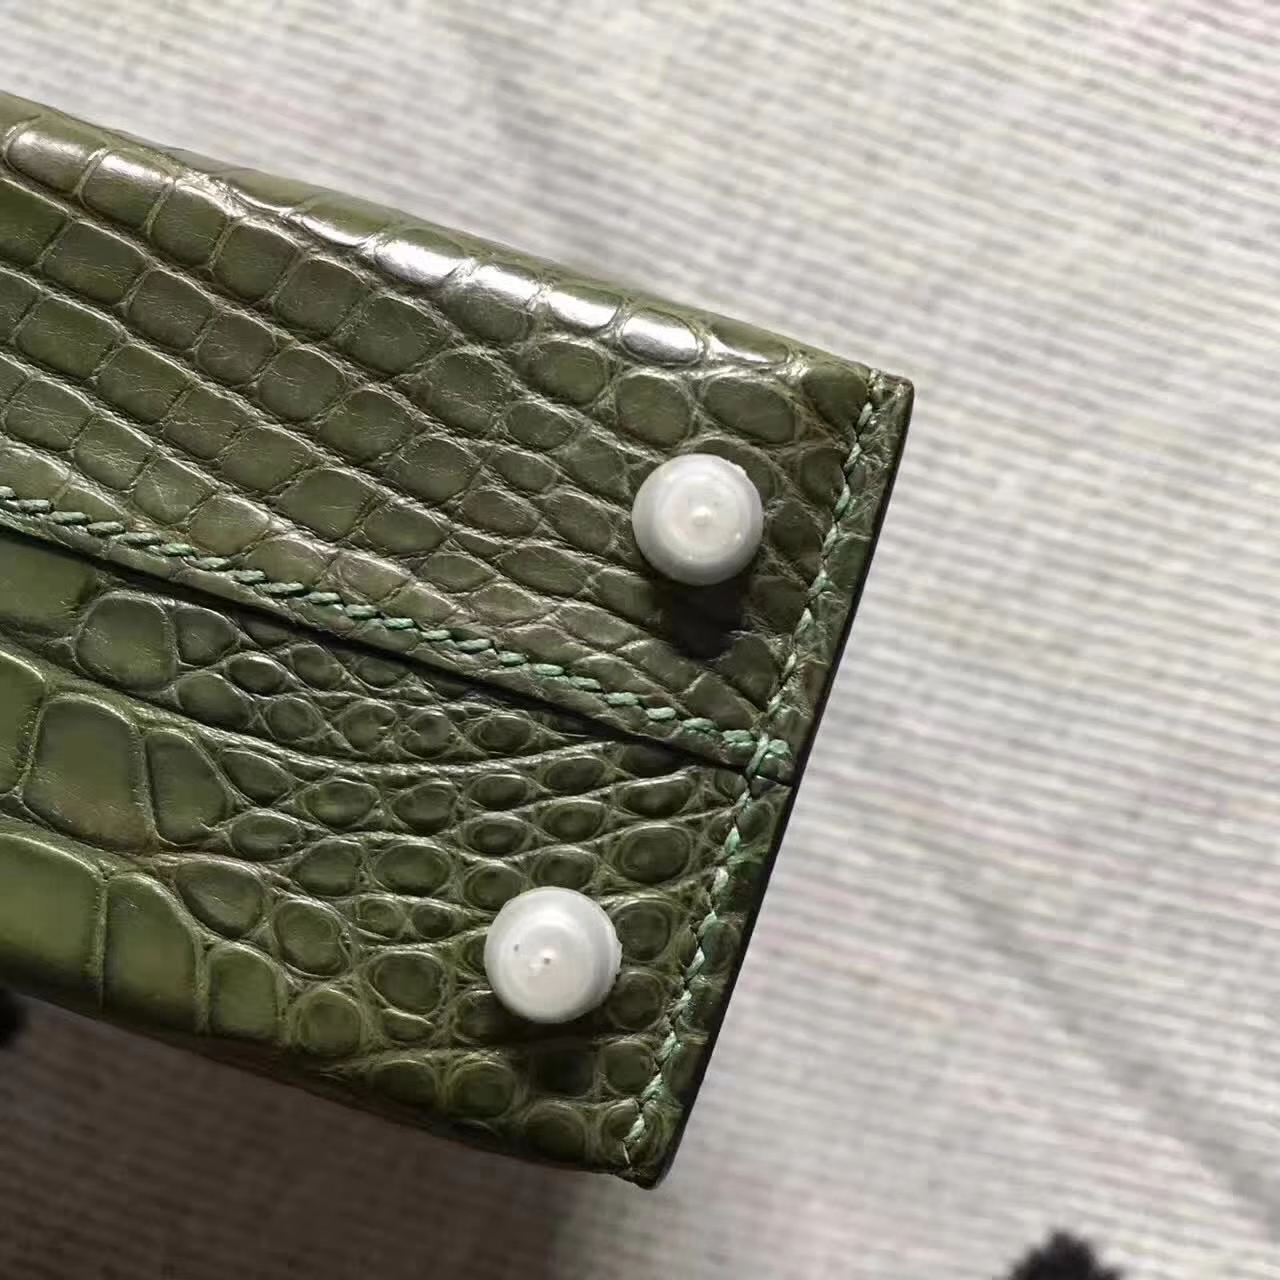 Hand Stitching Hermes Olive Green Crocodile Shiny Leather Minikelly-2 Clutch Bag